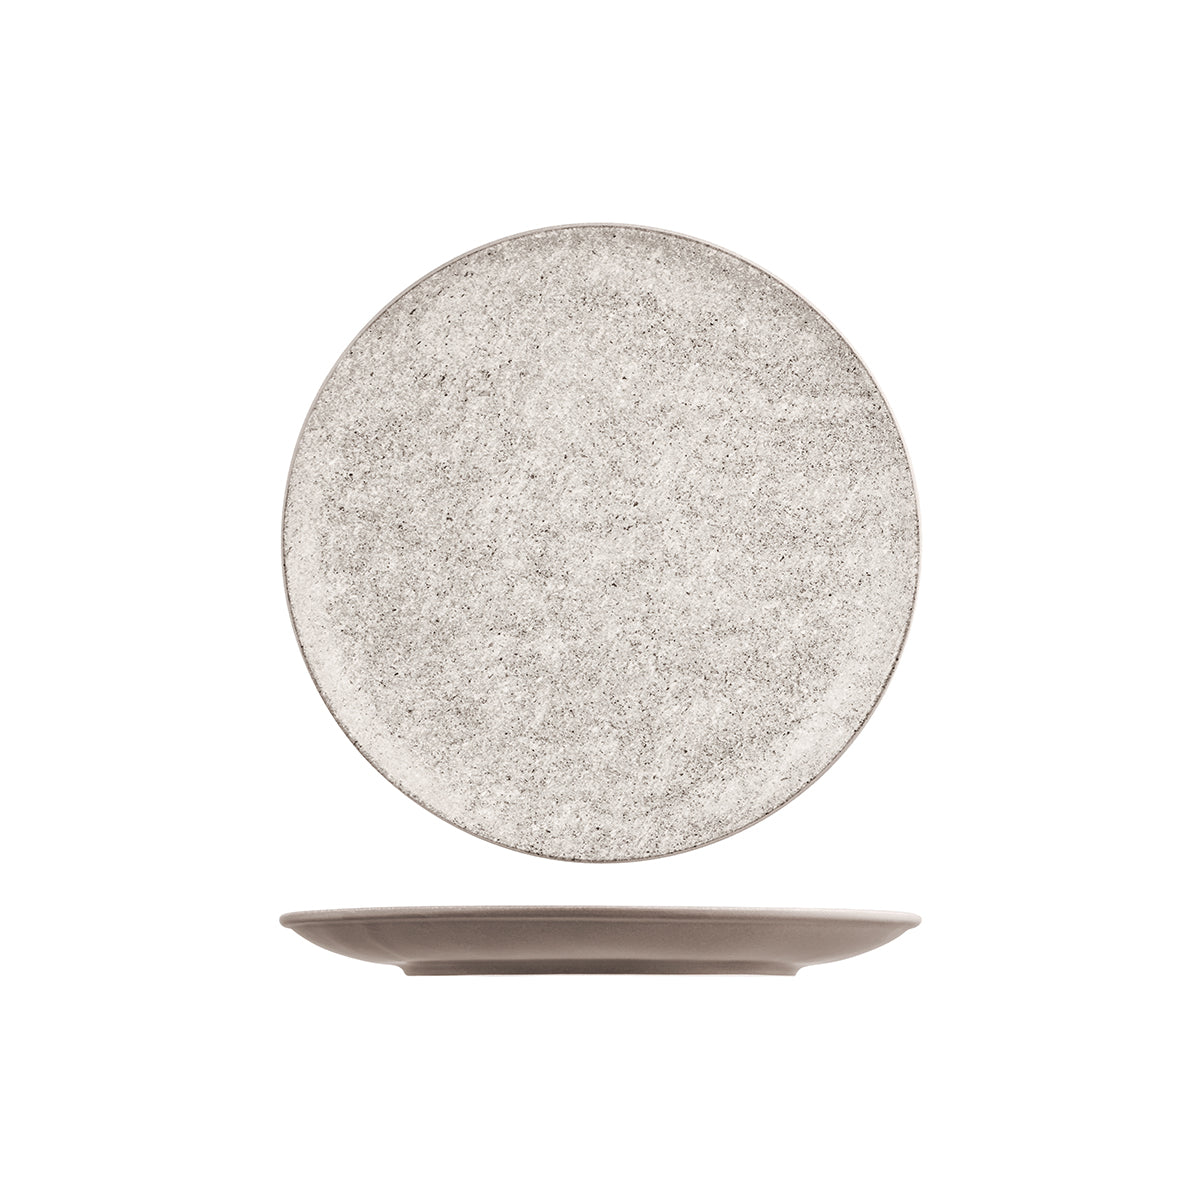 Round Coupe Plate - 270Mm, Opulenz from Rak Porcelain. made out of Porcelain and sold in boxes of 12. Hospitality quality at wholesale price with The Flying Fork! 